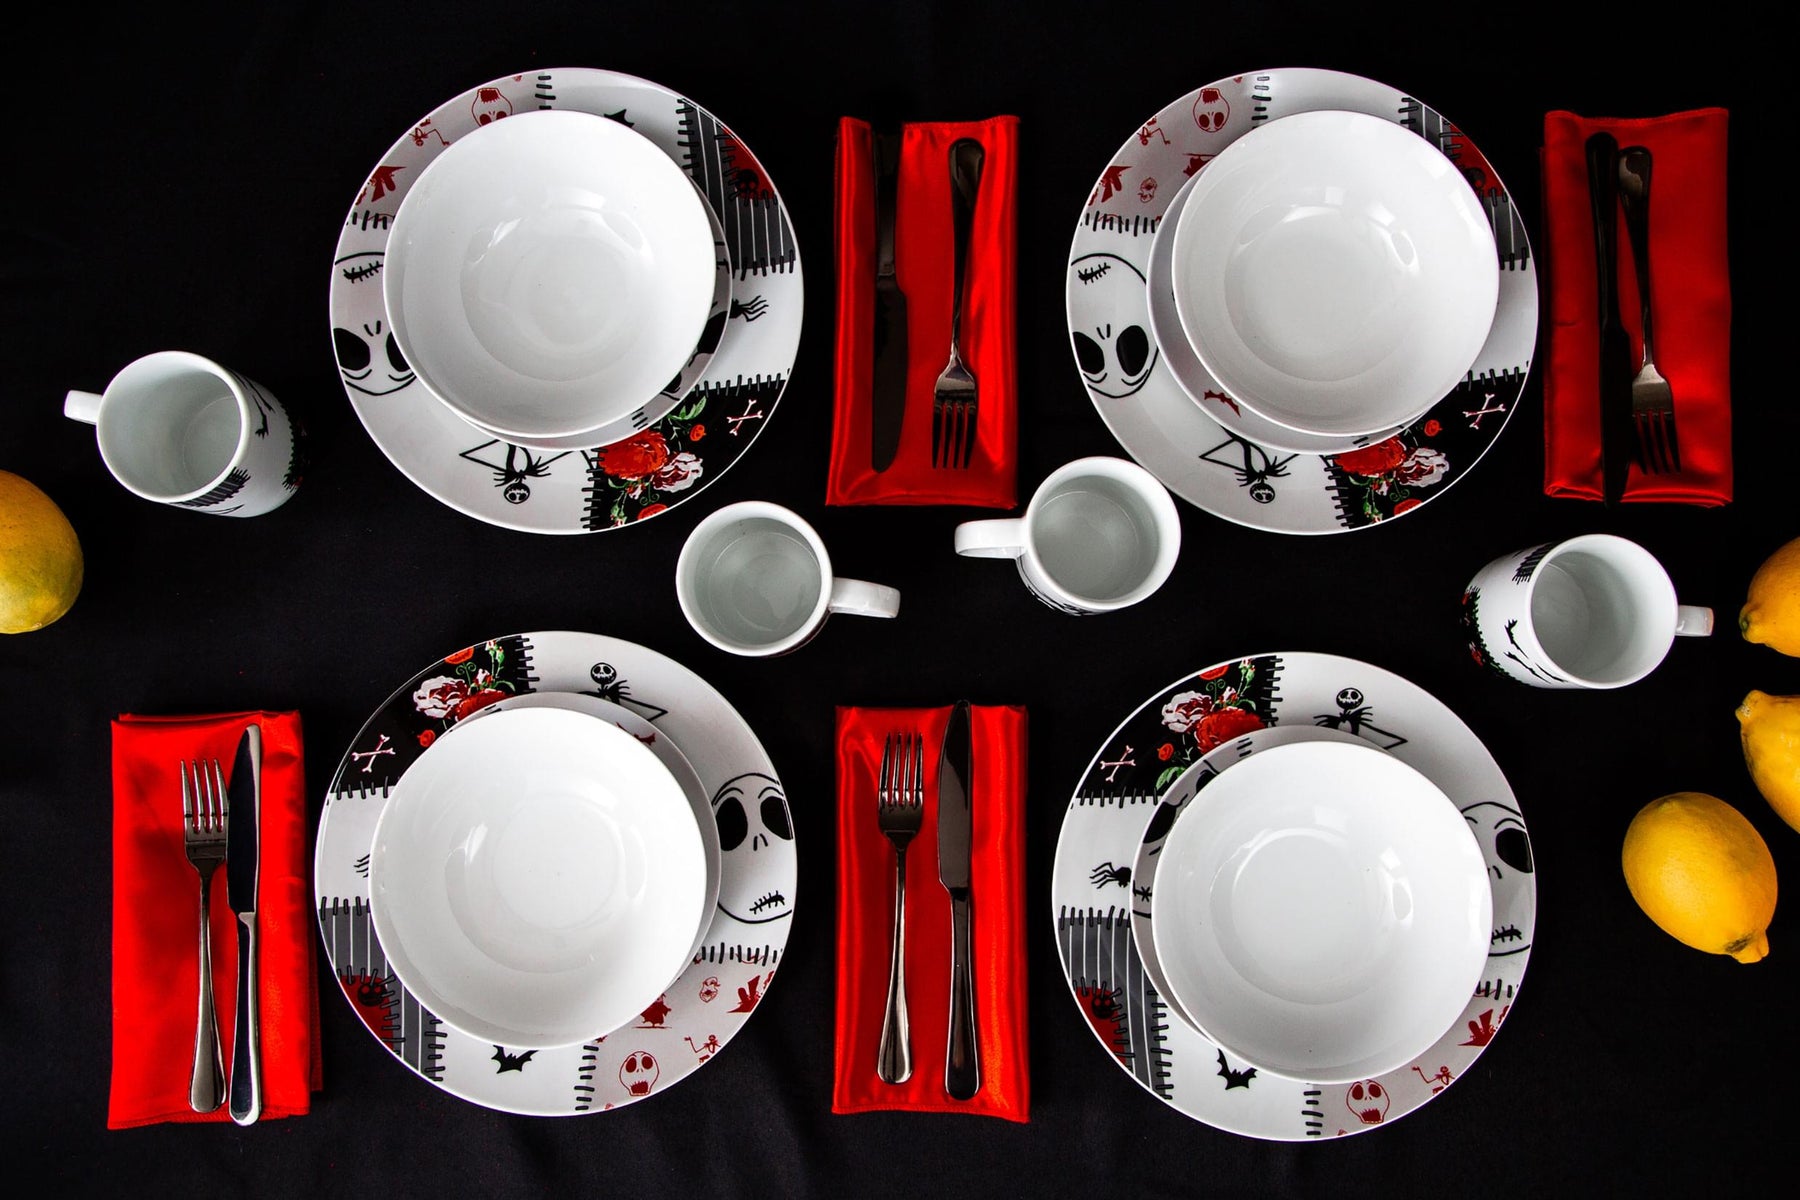 The Nightmare Before Christmas Patched Up 16-Piece Dinnerware Set